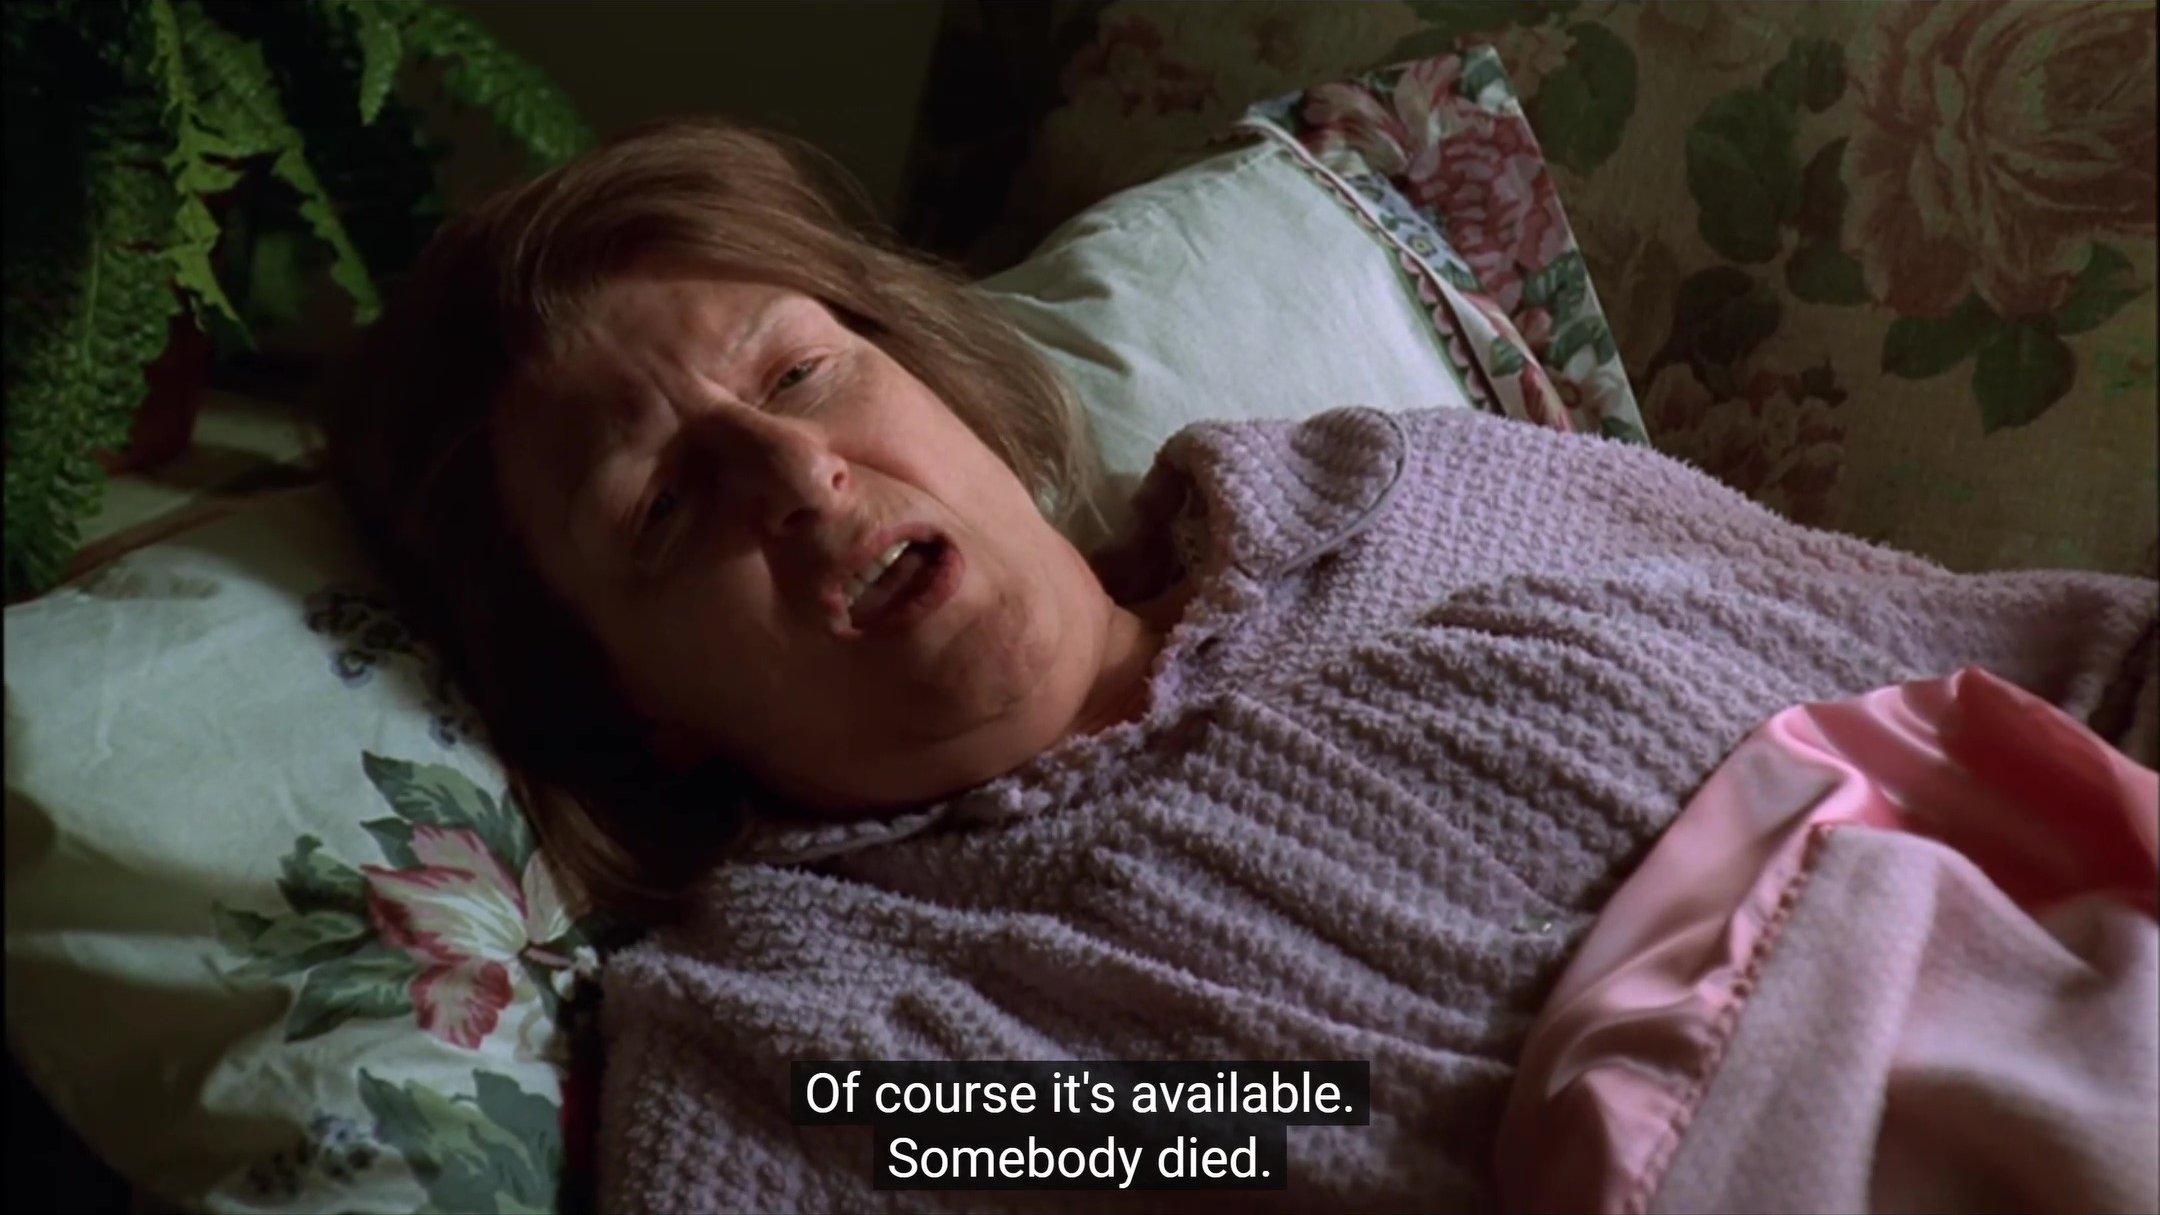 livia soprano is telling tony that of course a room is available because somebody died.